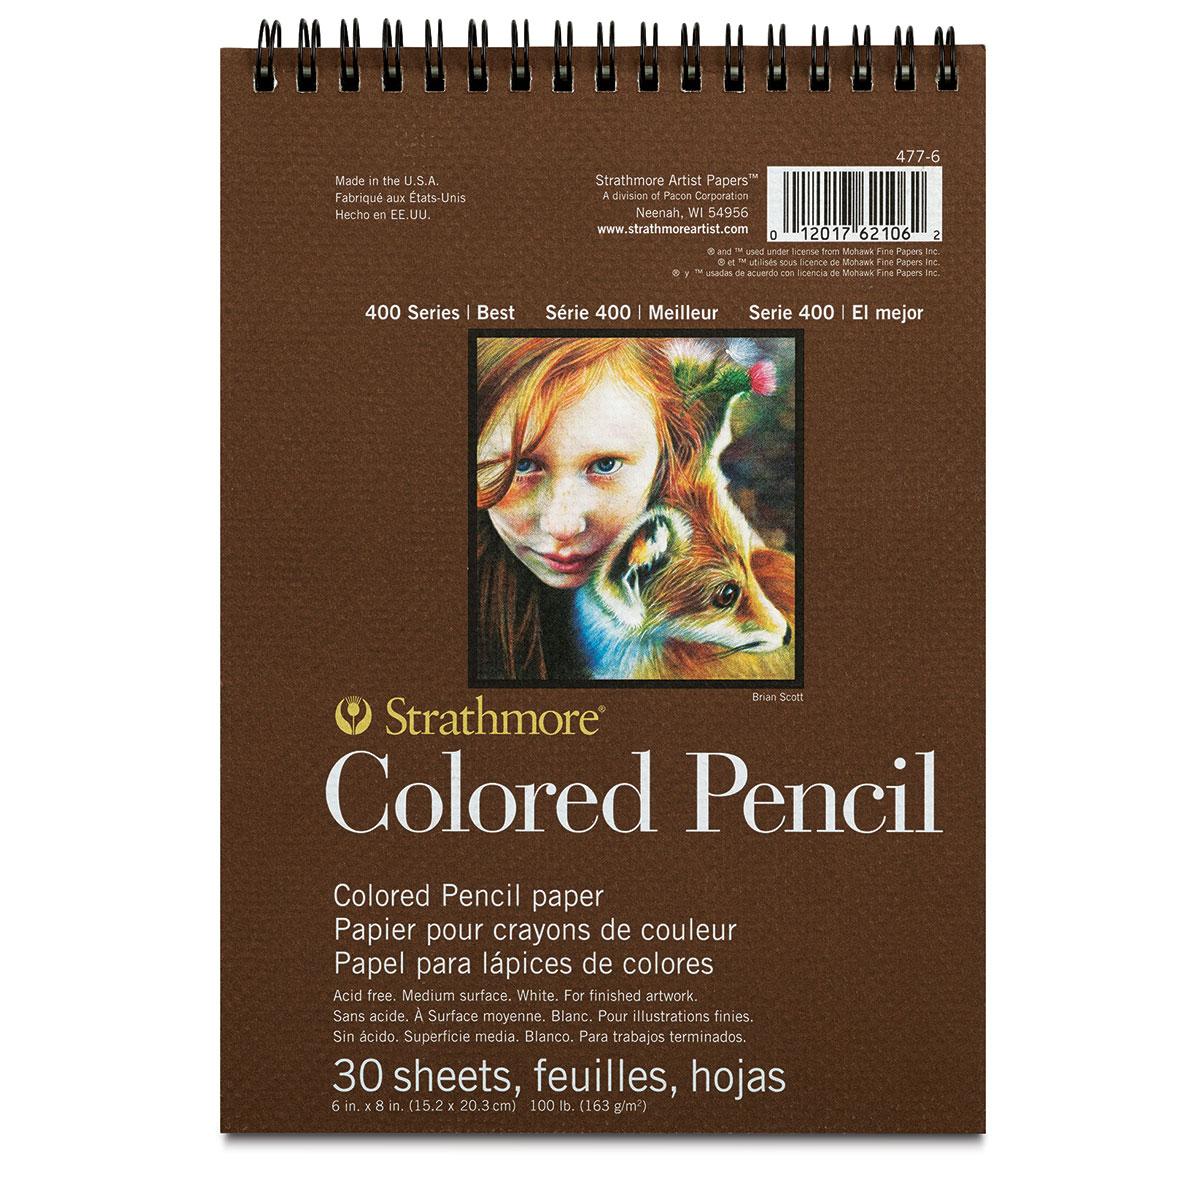 COMING SOON - 400 Series Colored Pencil Paper! - Strathmore Artist